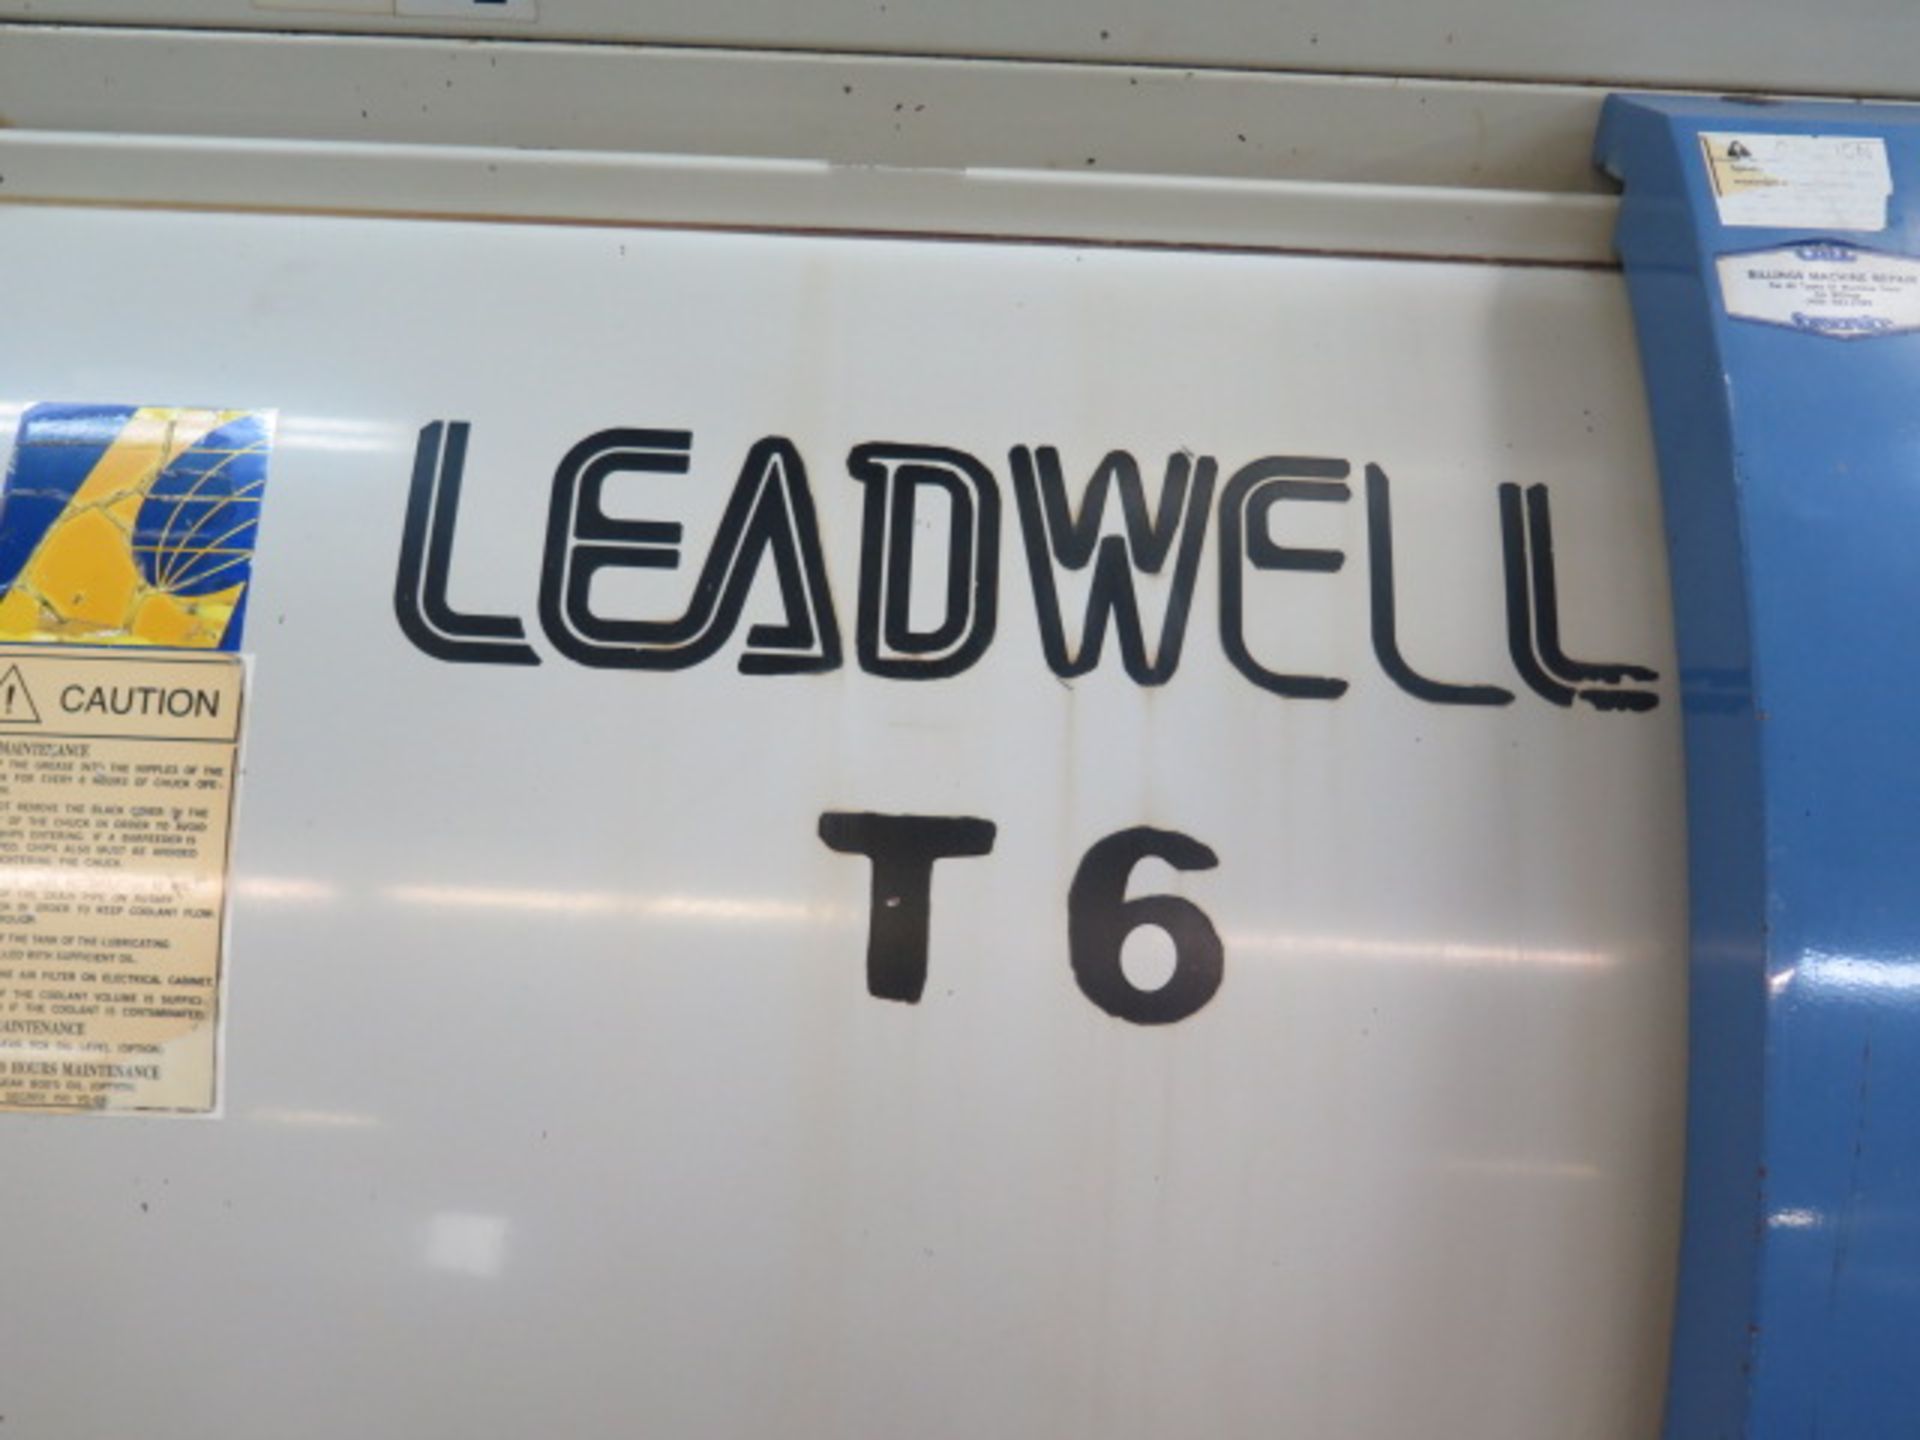 Leadwell T6 CNC Turning Center s/n L2TJJ0823 w/Fanuc Series 0-T Controls, Tool Presetter, SOLD AS IS - Image 12 of 12